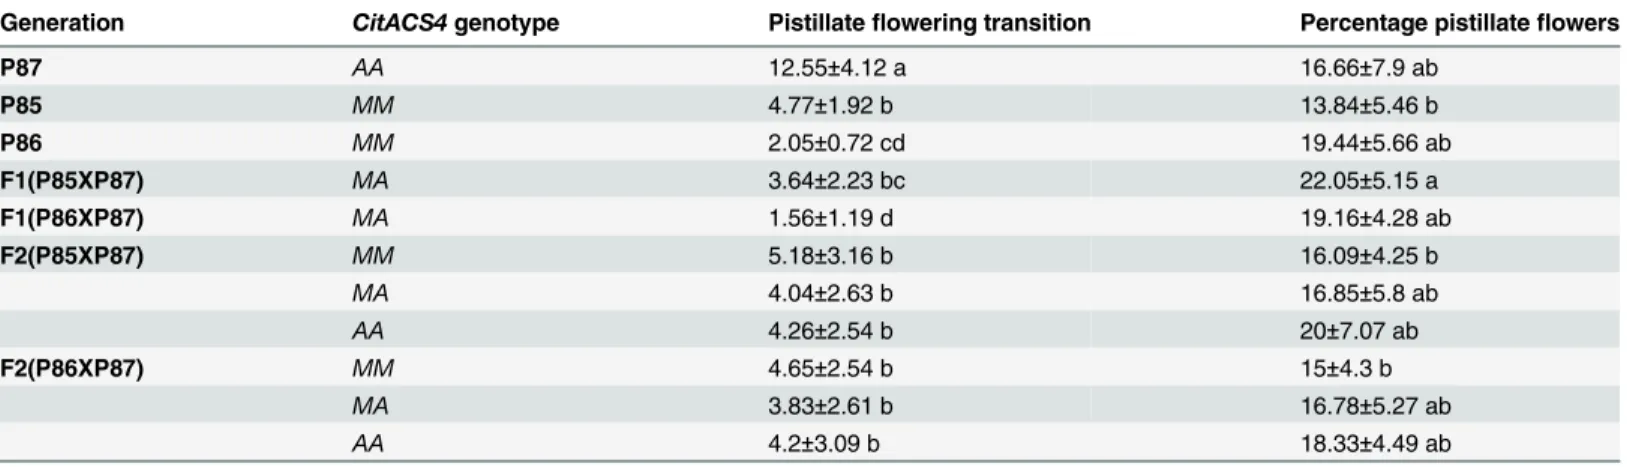 Table 3. Evaluation of sex expression (transition to pistillate flowering and % pistillate flowers per plant) in F1 and F2 populations derived from crosses monoecious x andromonoecious.